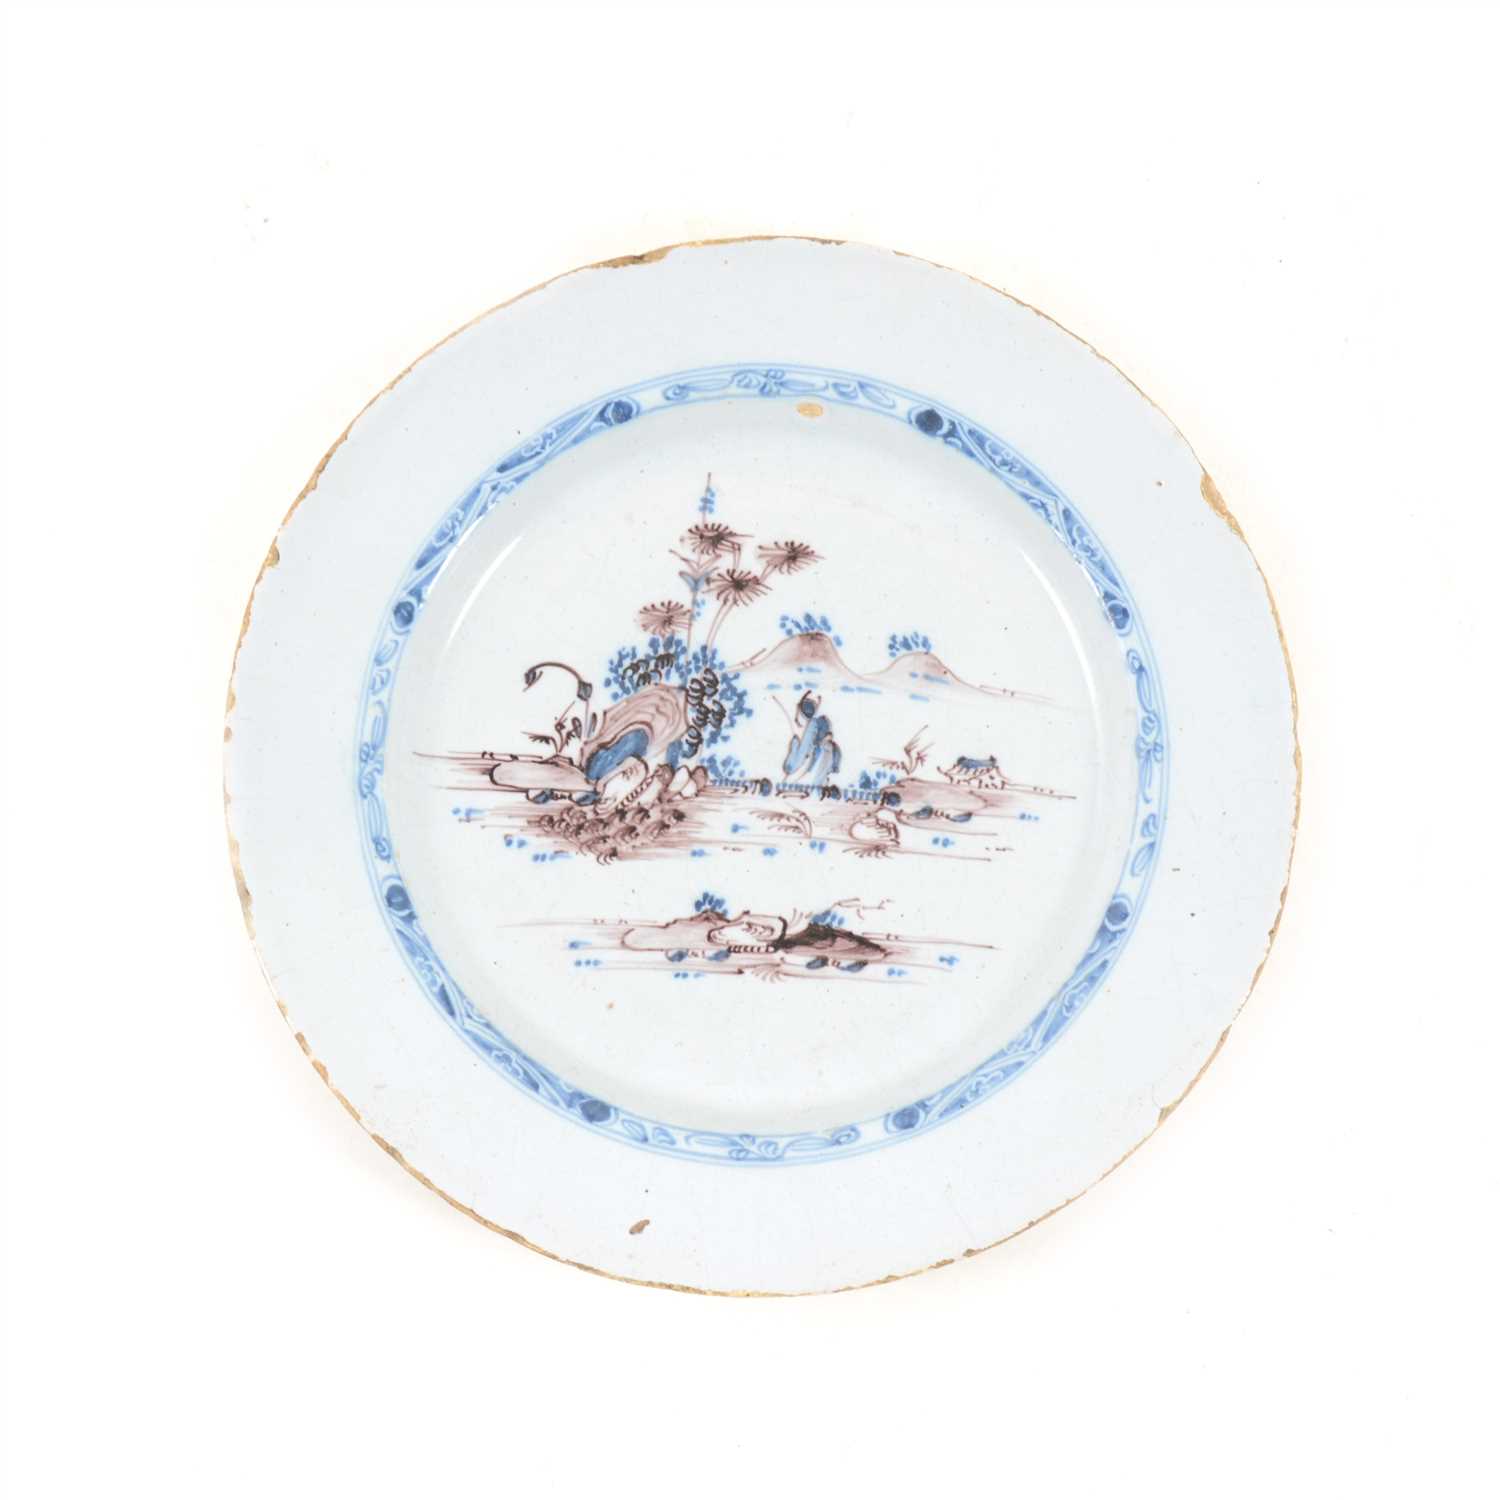 Lot 26 - Dutch Delft plate, mid 18th Century, painted with a Chinese landscape, ...